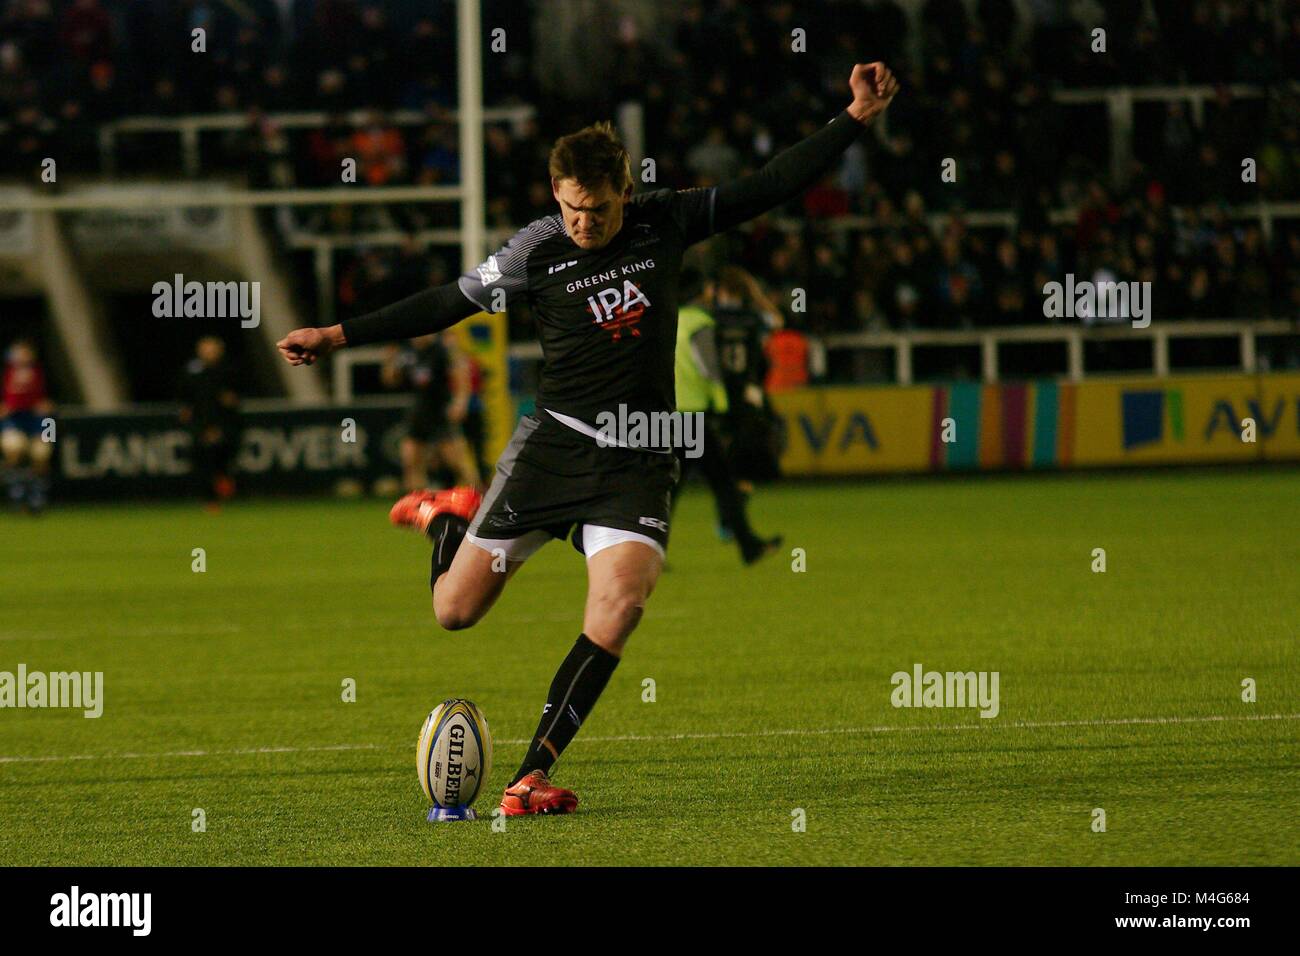 Newcastle upon Tyne, UK. 16th February 2018. Toby Flood kicking a conversion for Newcastle Falcons at Kingston Park. Credit: Colin Edwards/Alamy Live News. Stock Photo